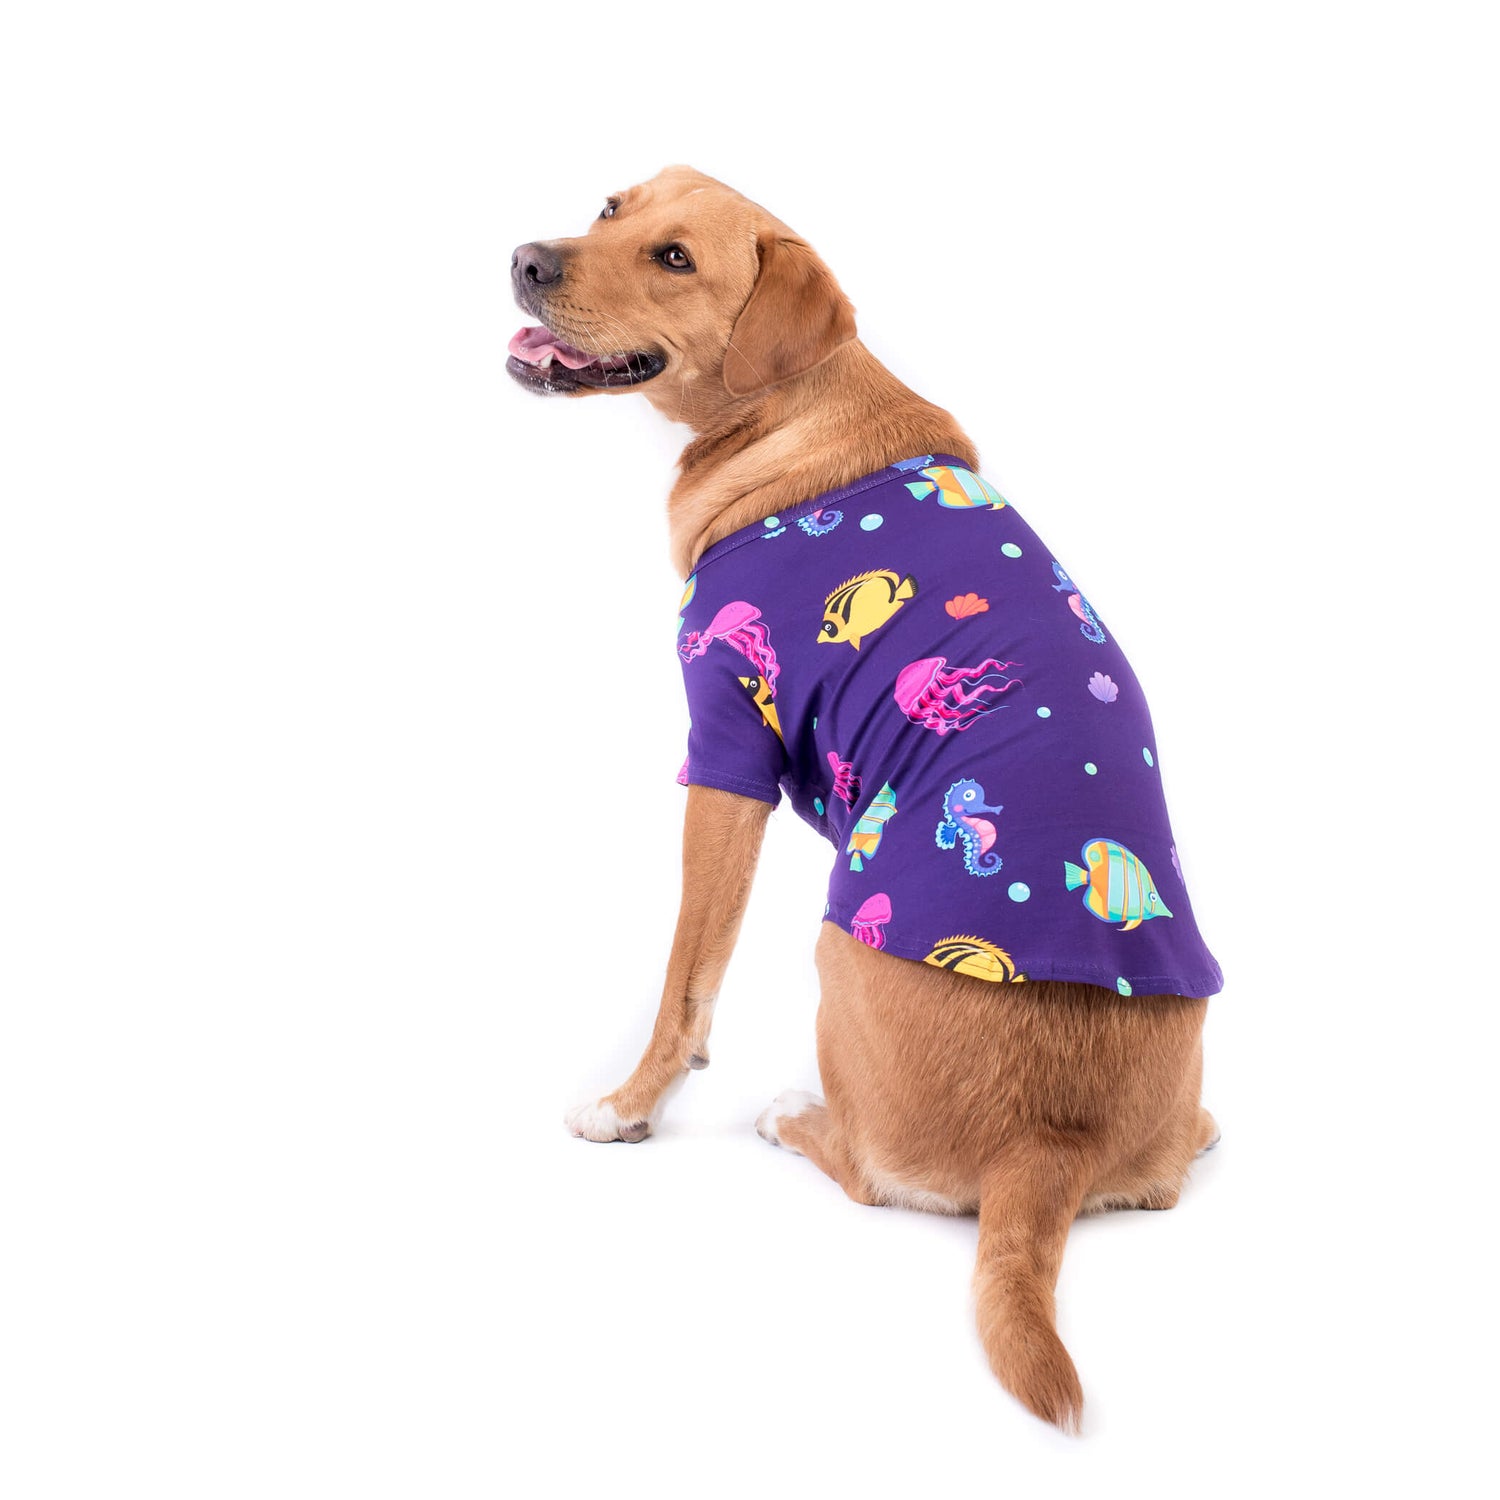 A Golden Retriever wearing the 'Magic Sea' shirt by Vibrant Hound. The shirt is purple with bright tropical fish printed on it.